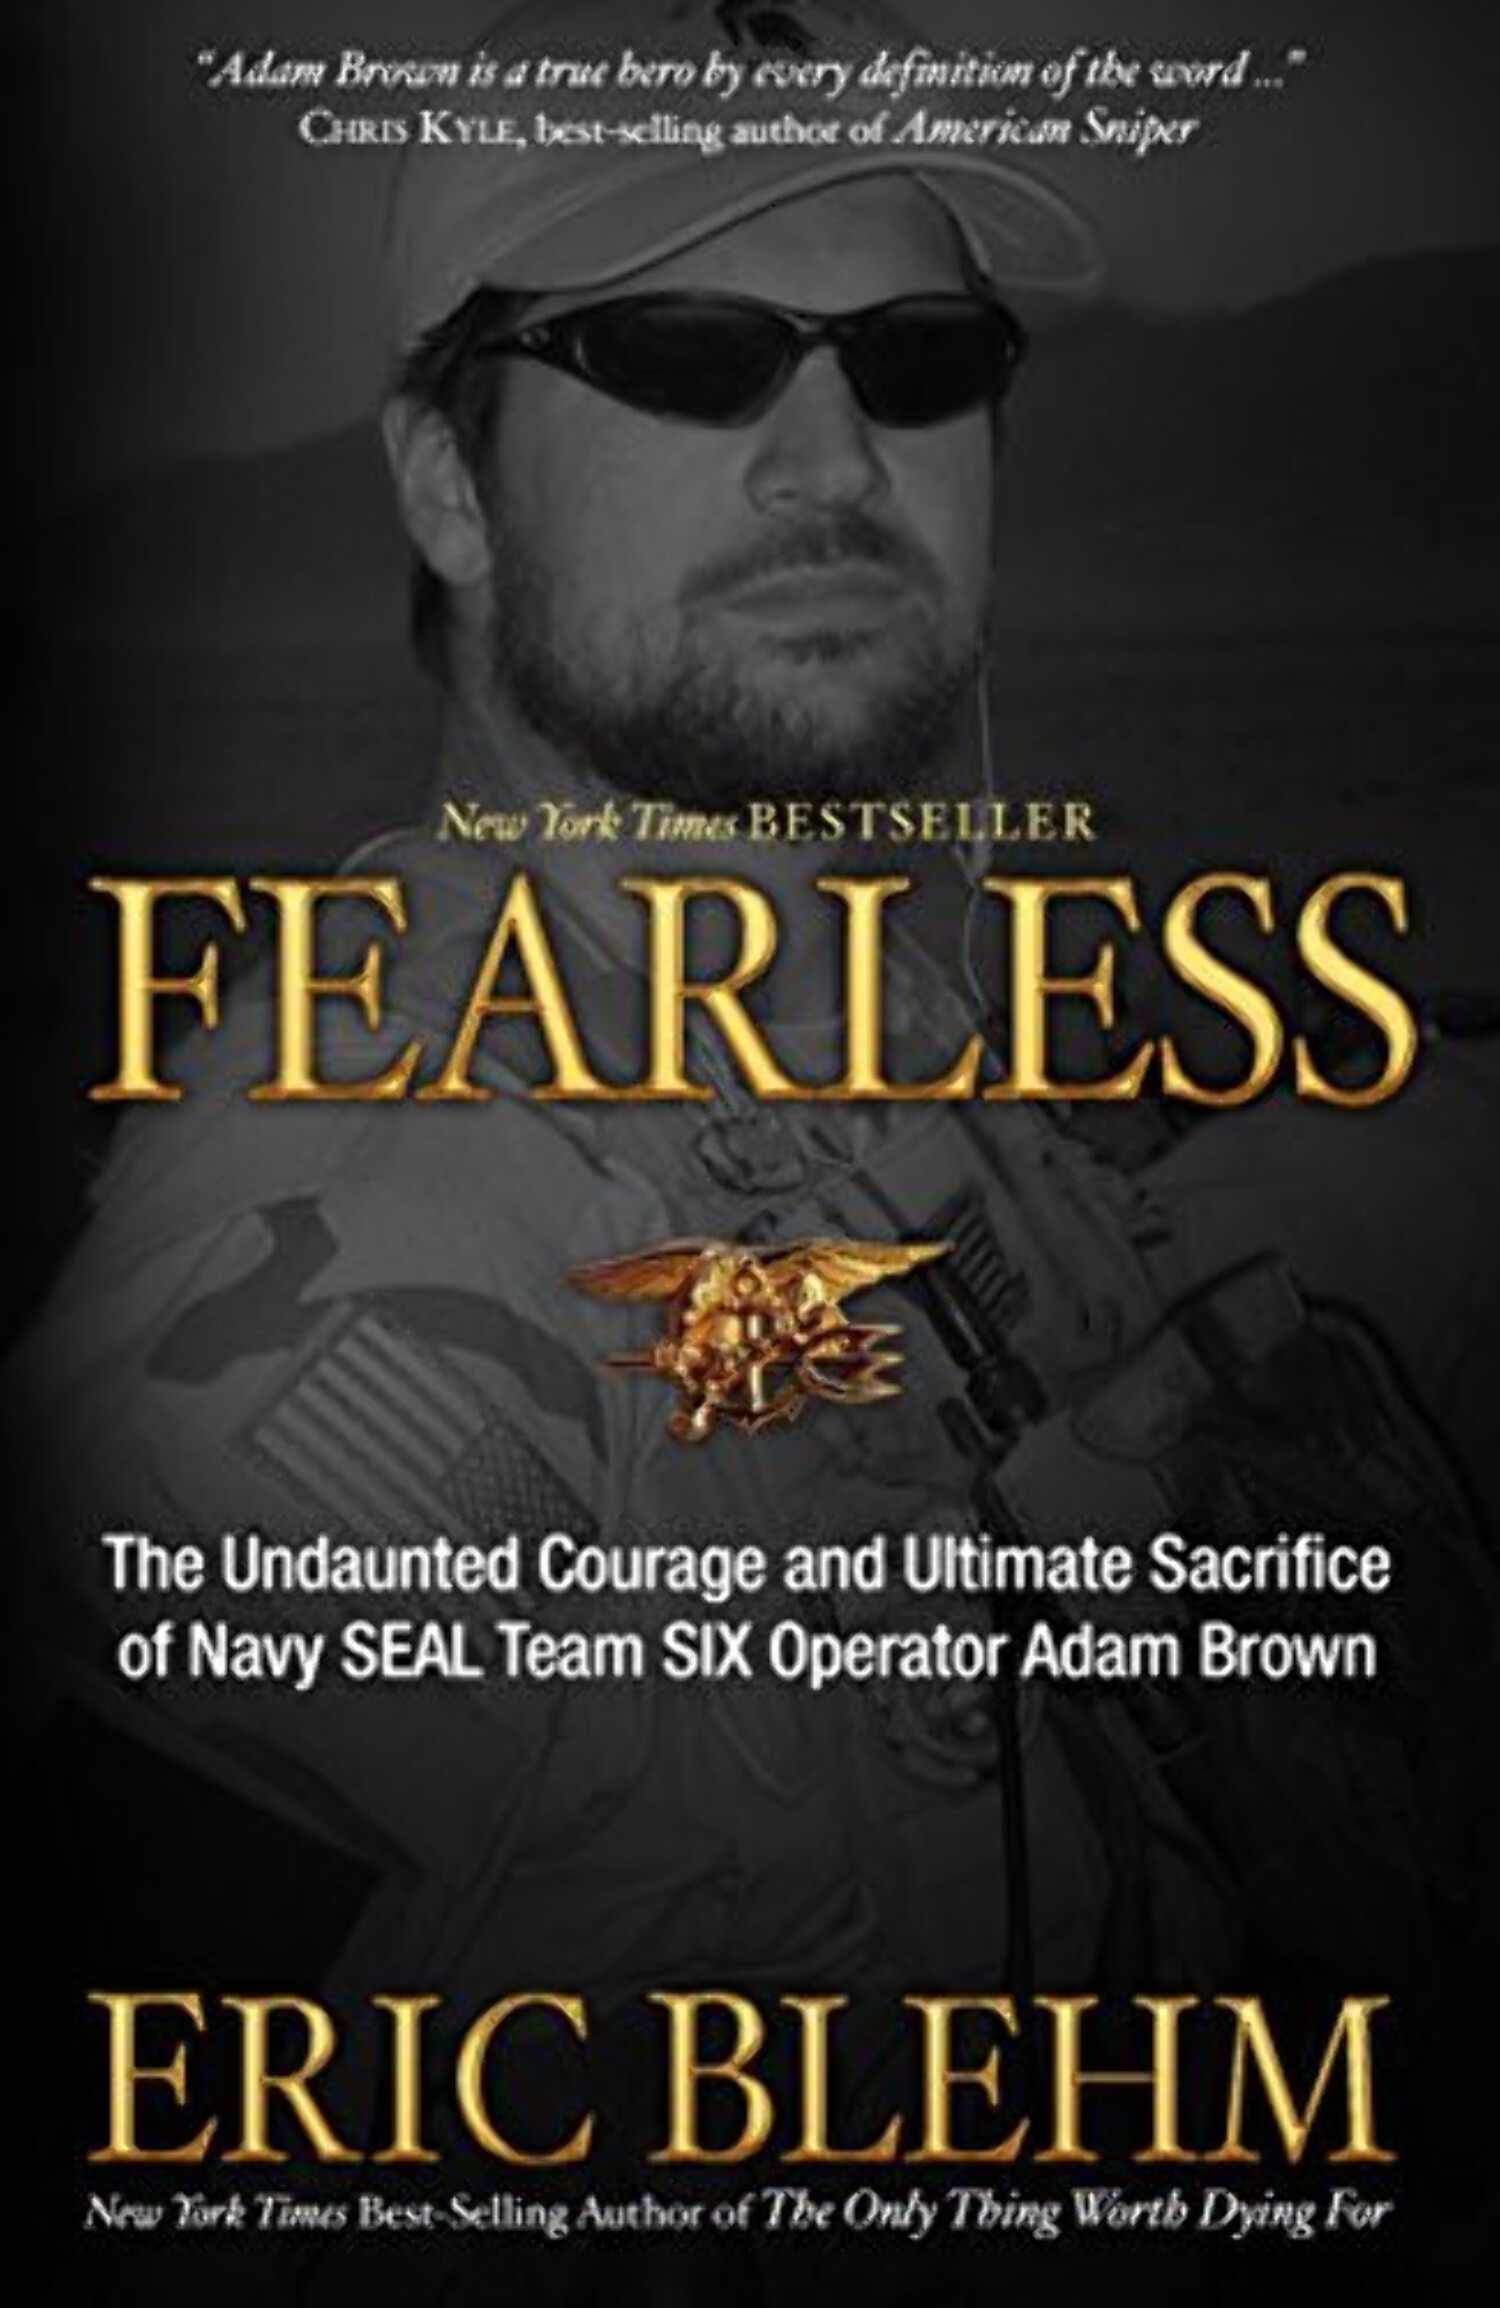 Fearless : The Undaunted Courage and Ultimate Sacrifice of Navy SEAL Team SIX Operator Adam Brown (Paperback) - image 1 of 1